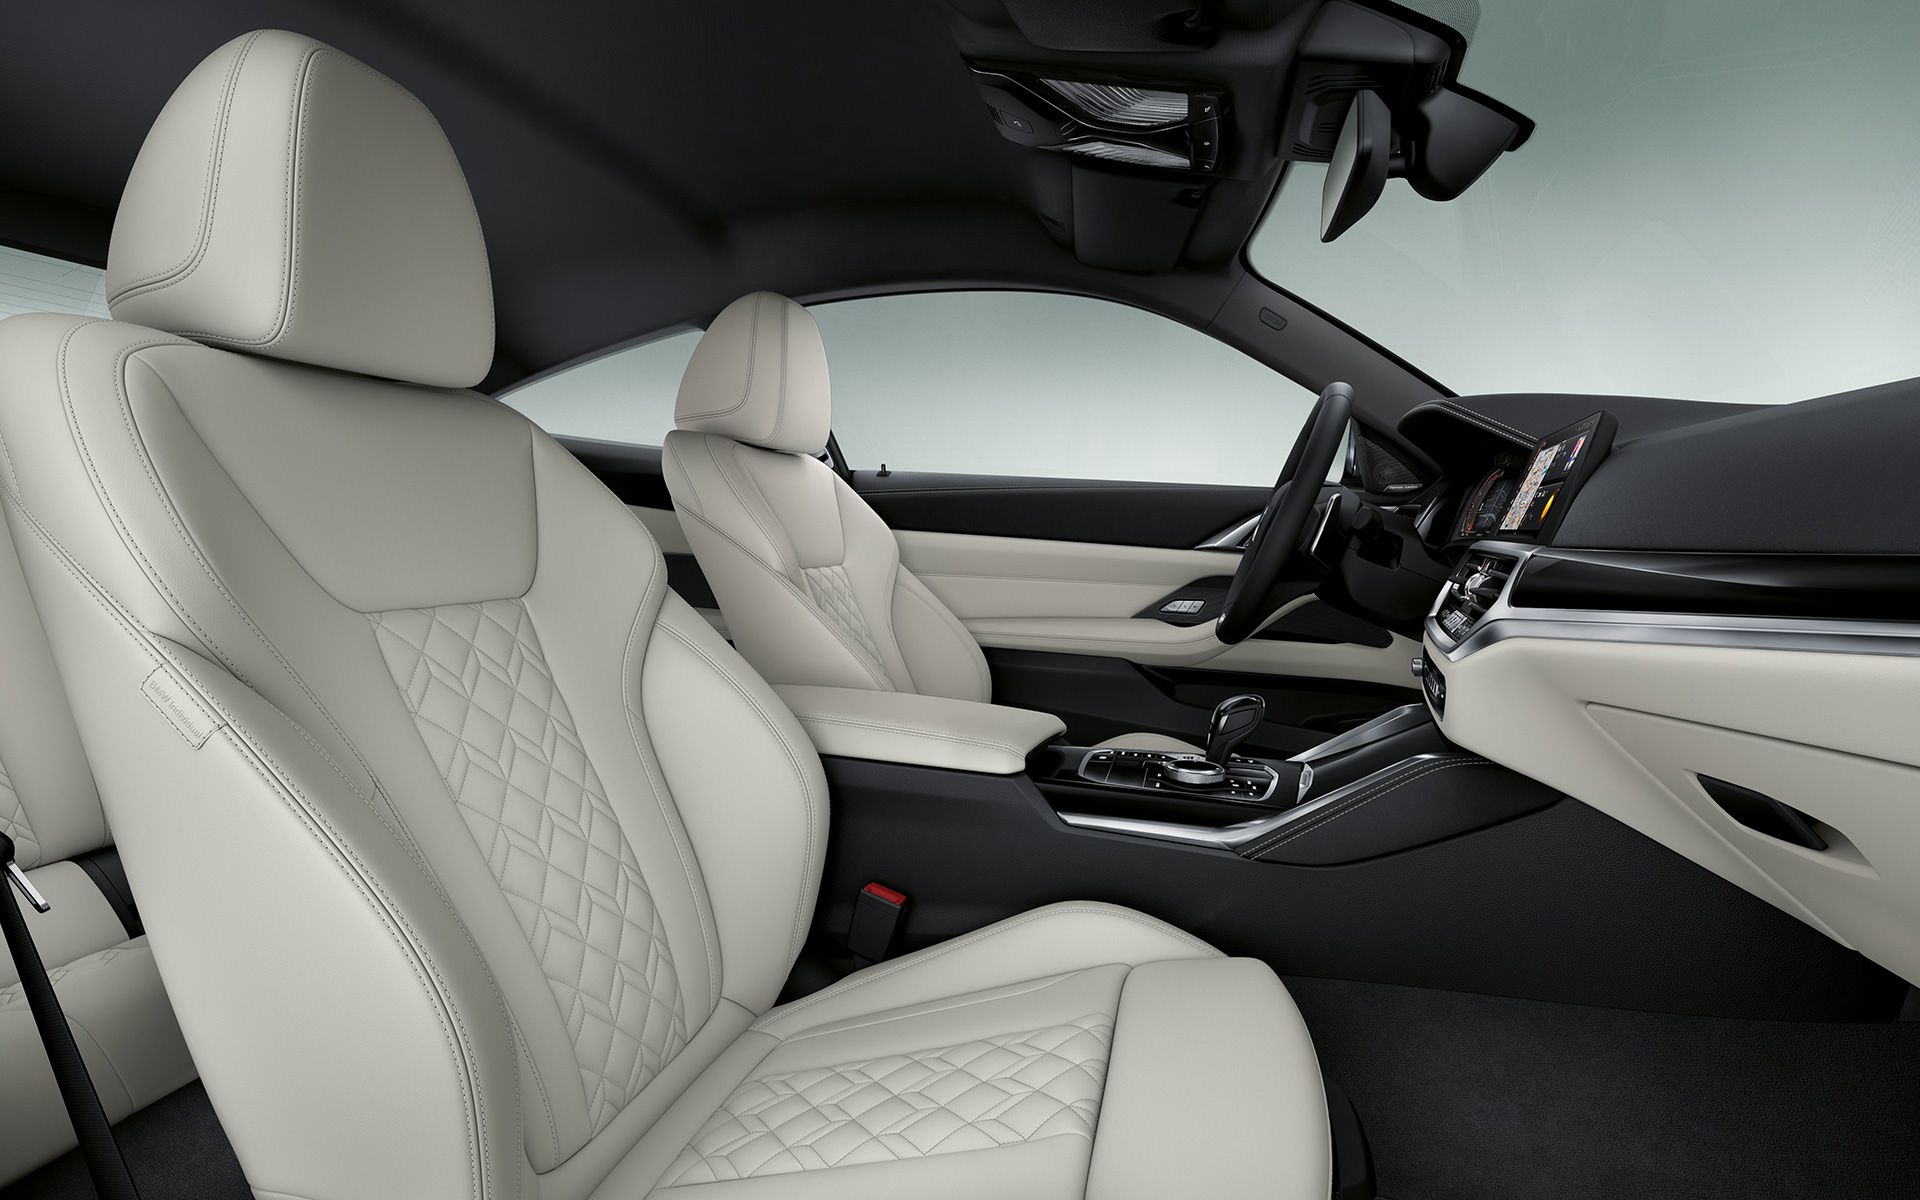 BMW Individual extended leather trim 'Merino' Ivory White BMW 4 Series Coupé Individual G22 2020 